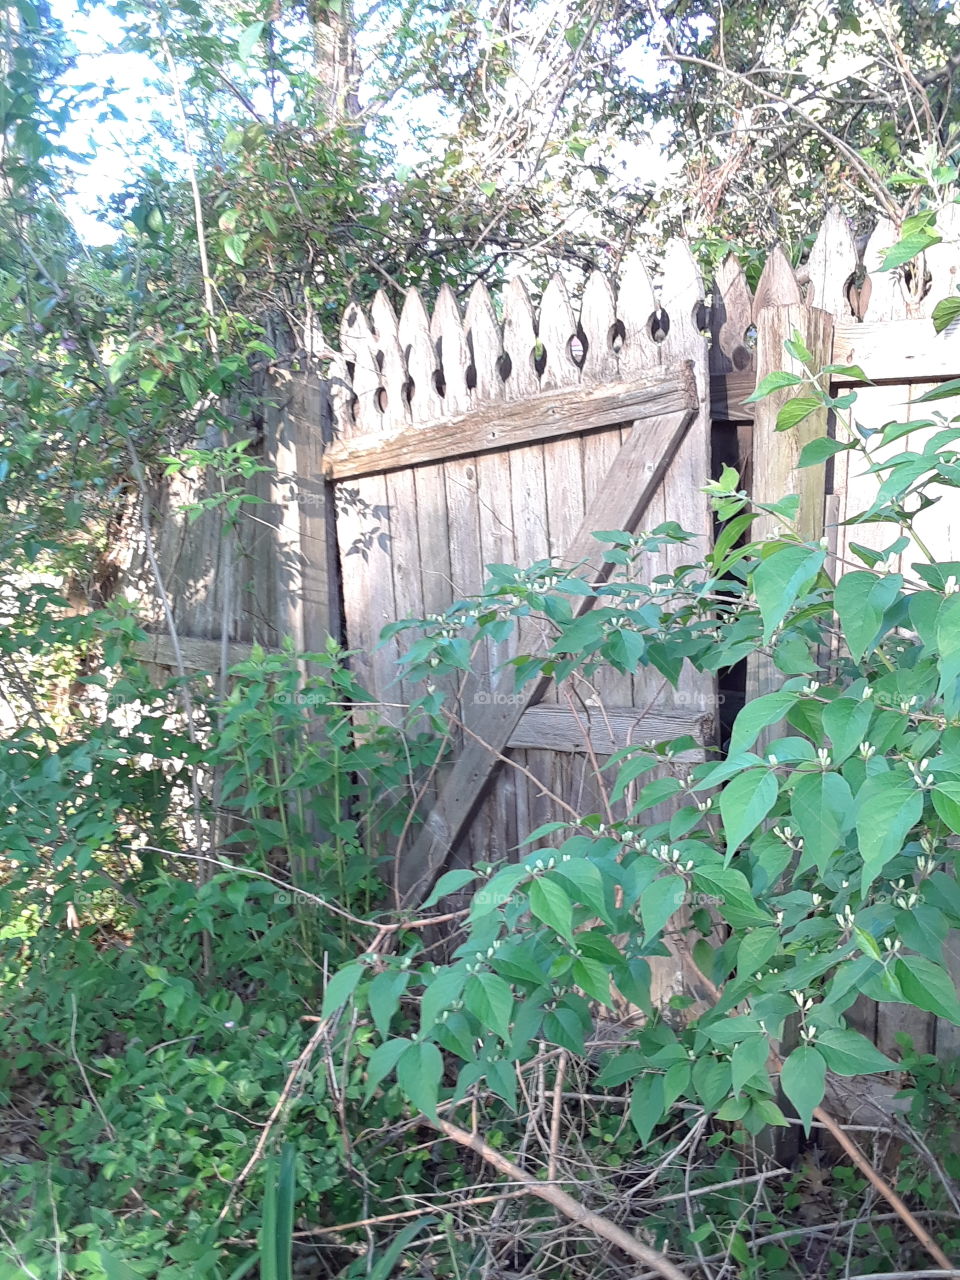 Old wooden fence with green weds and overgrowth